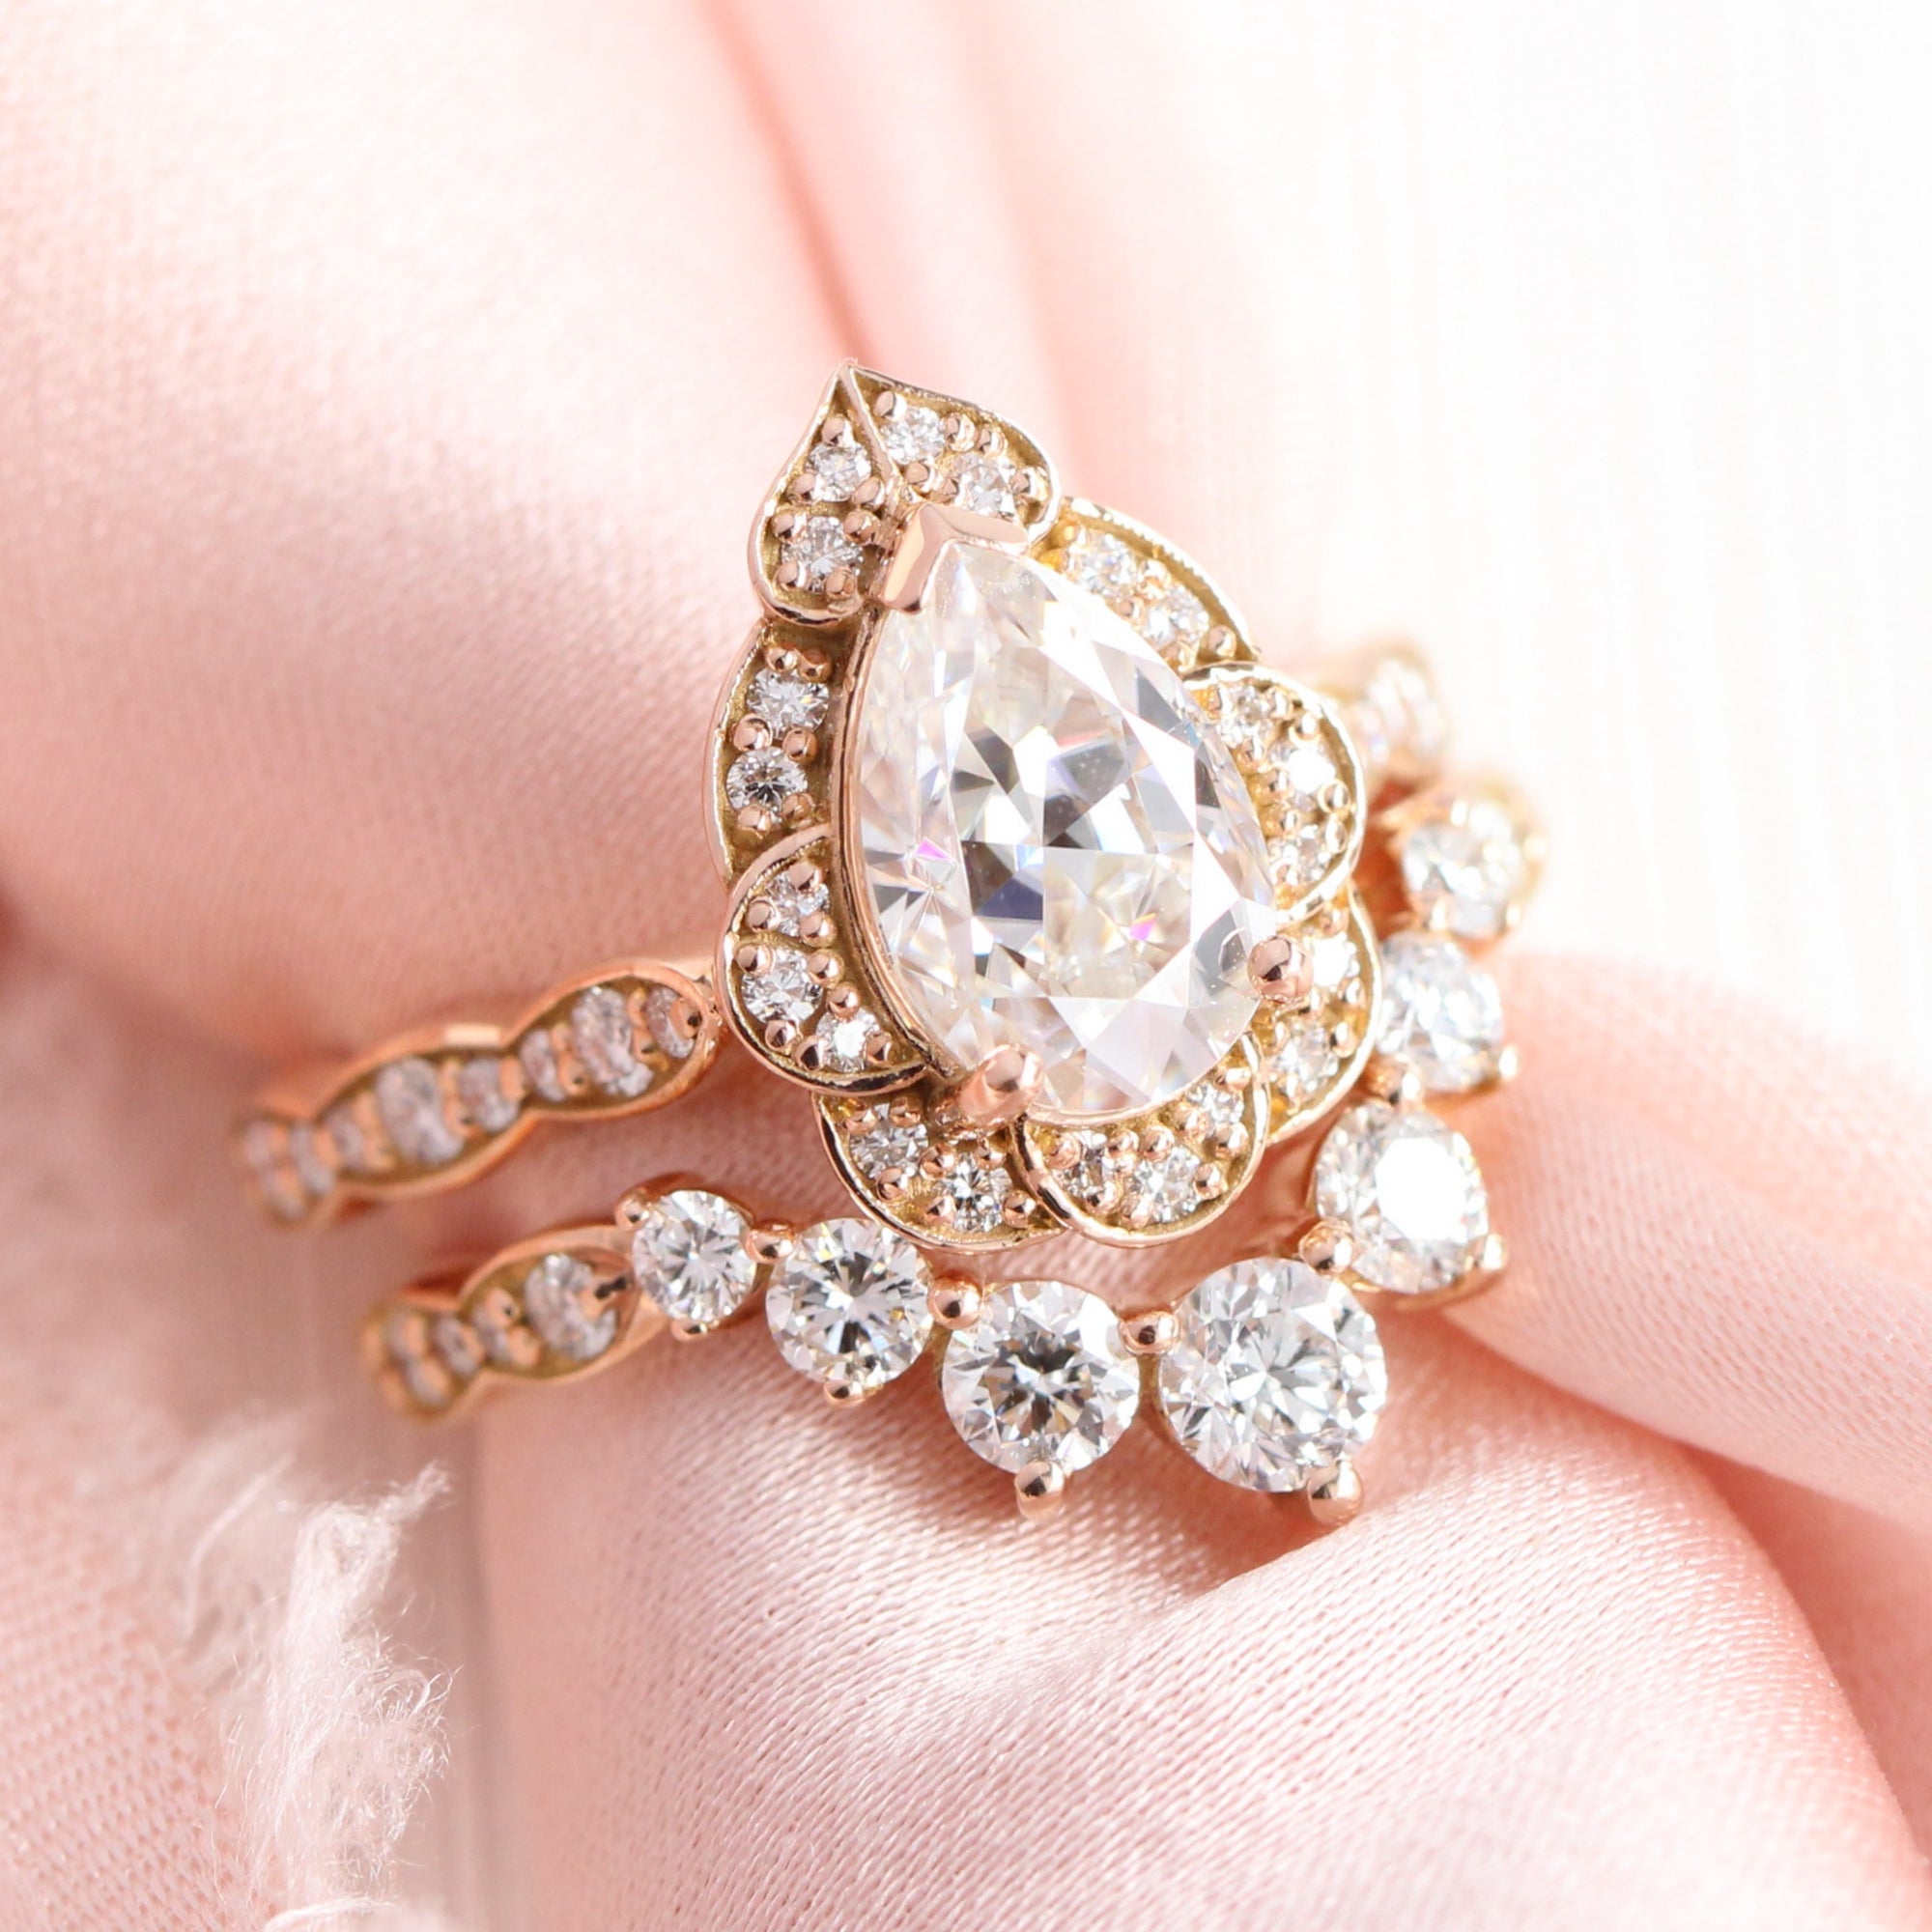 Jewelry Trends: Large Diamond Engagement Rings